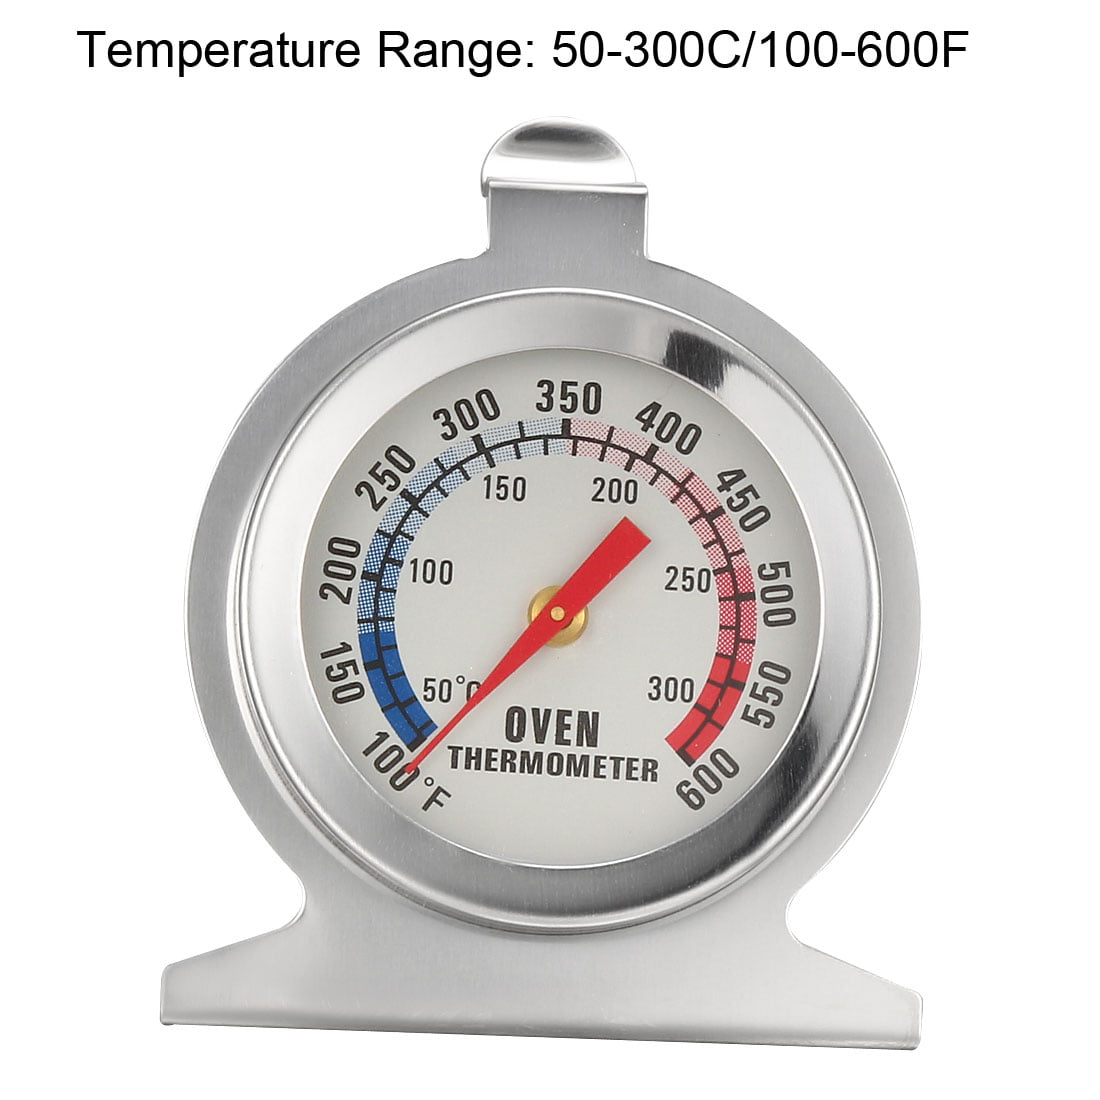 Oven Thermometers Digital Heat Resistant up to 300c Vintage Scale